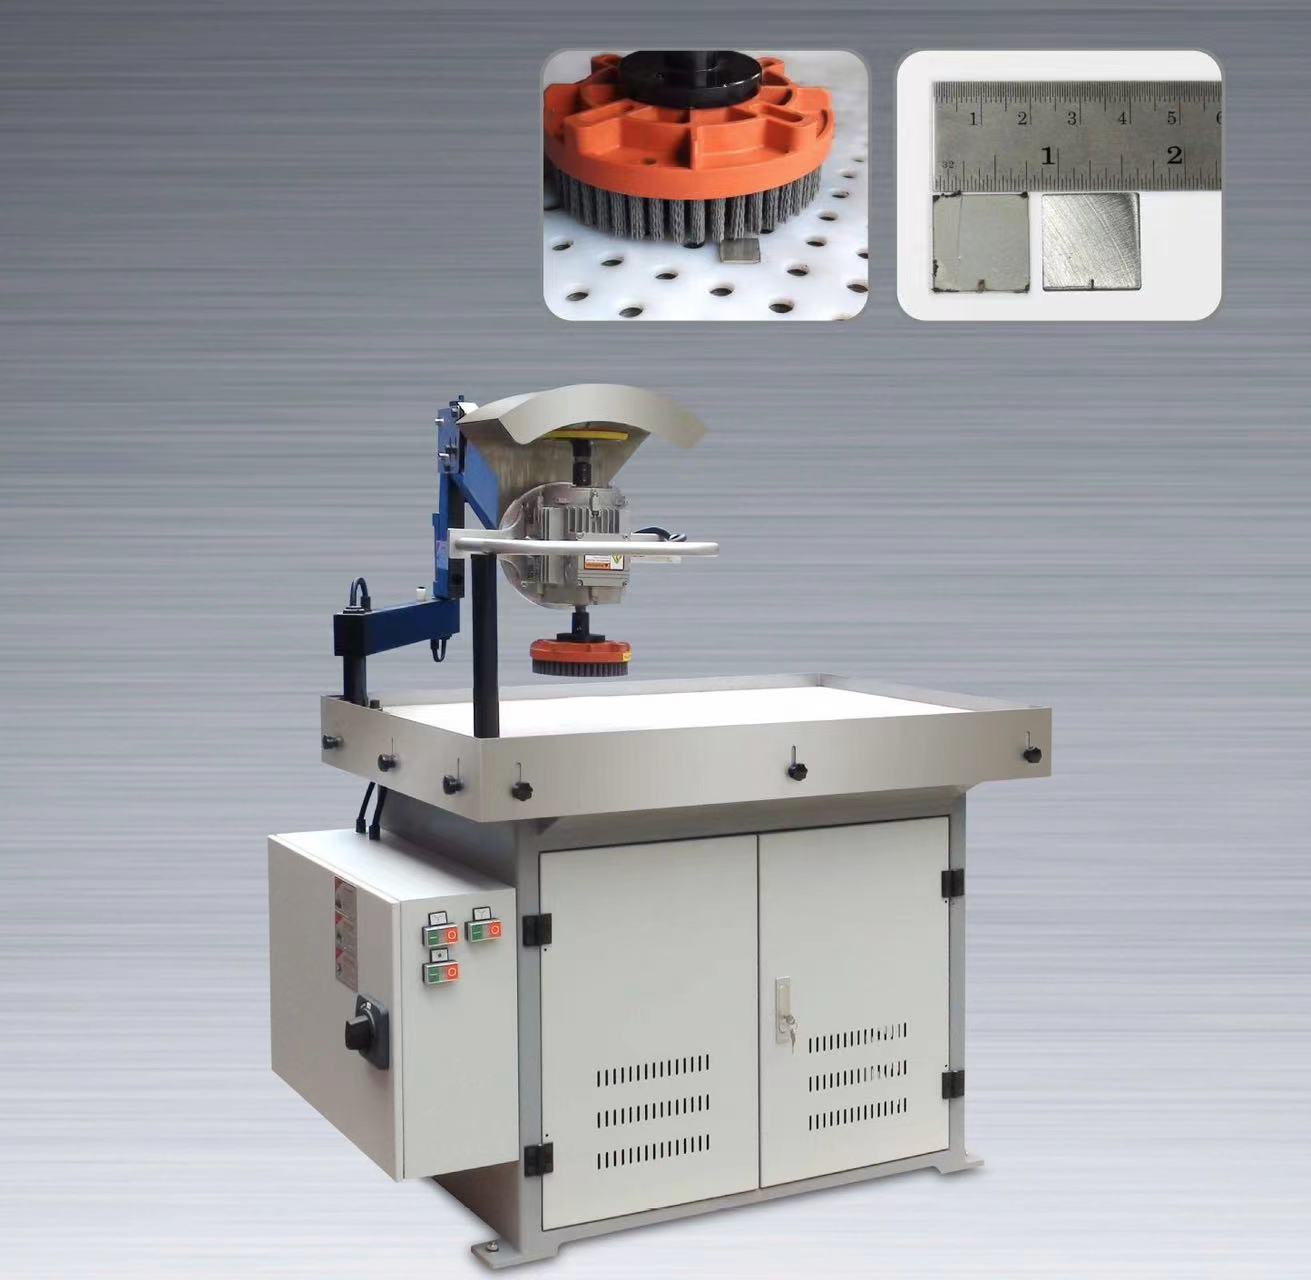 High configuration manual metal edge deburring grinding machine with vacuum table